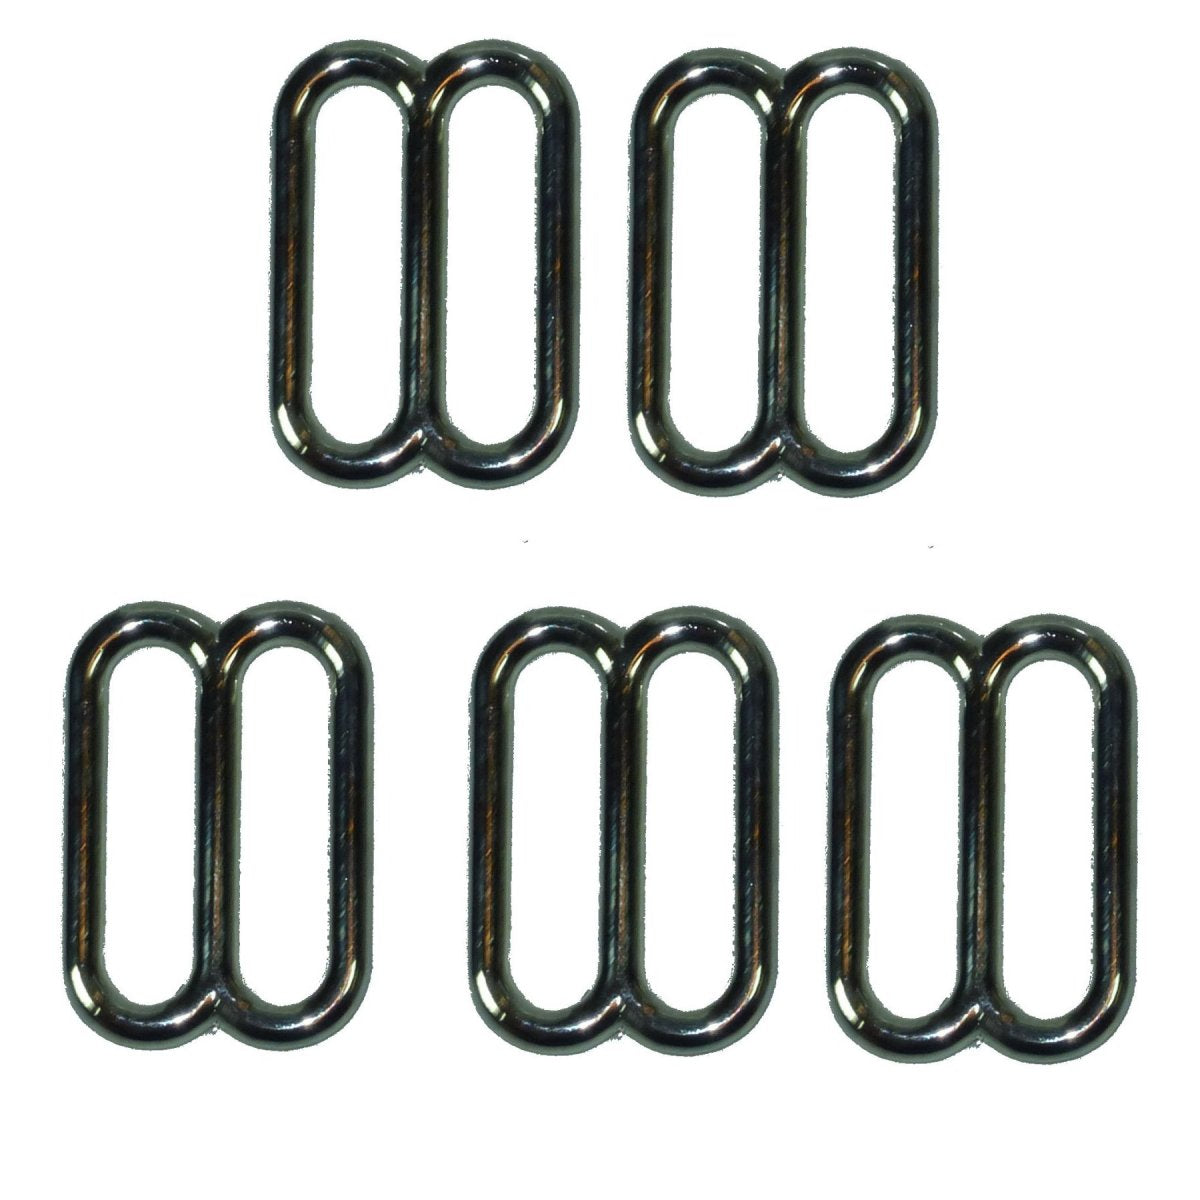 Benristraps 25mm alloy metal silver-coloured triglide (pack of 5)